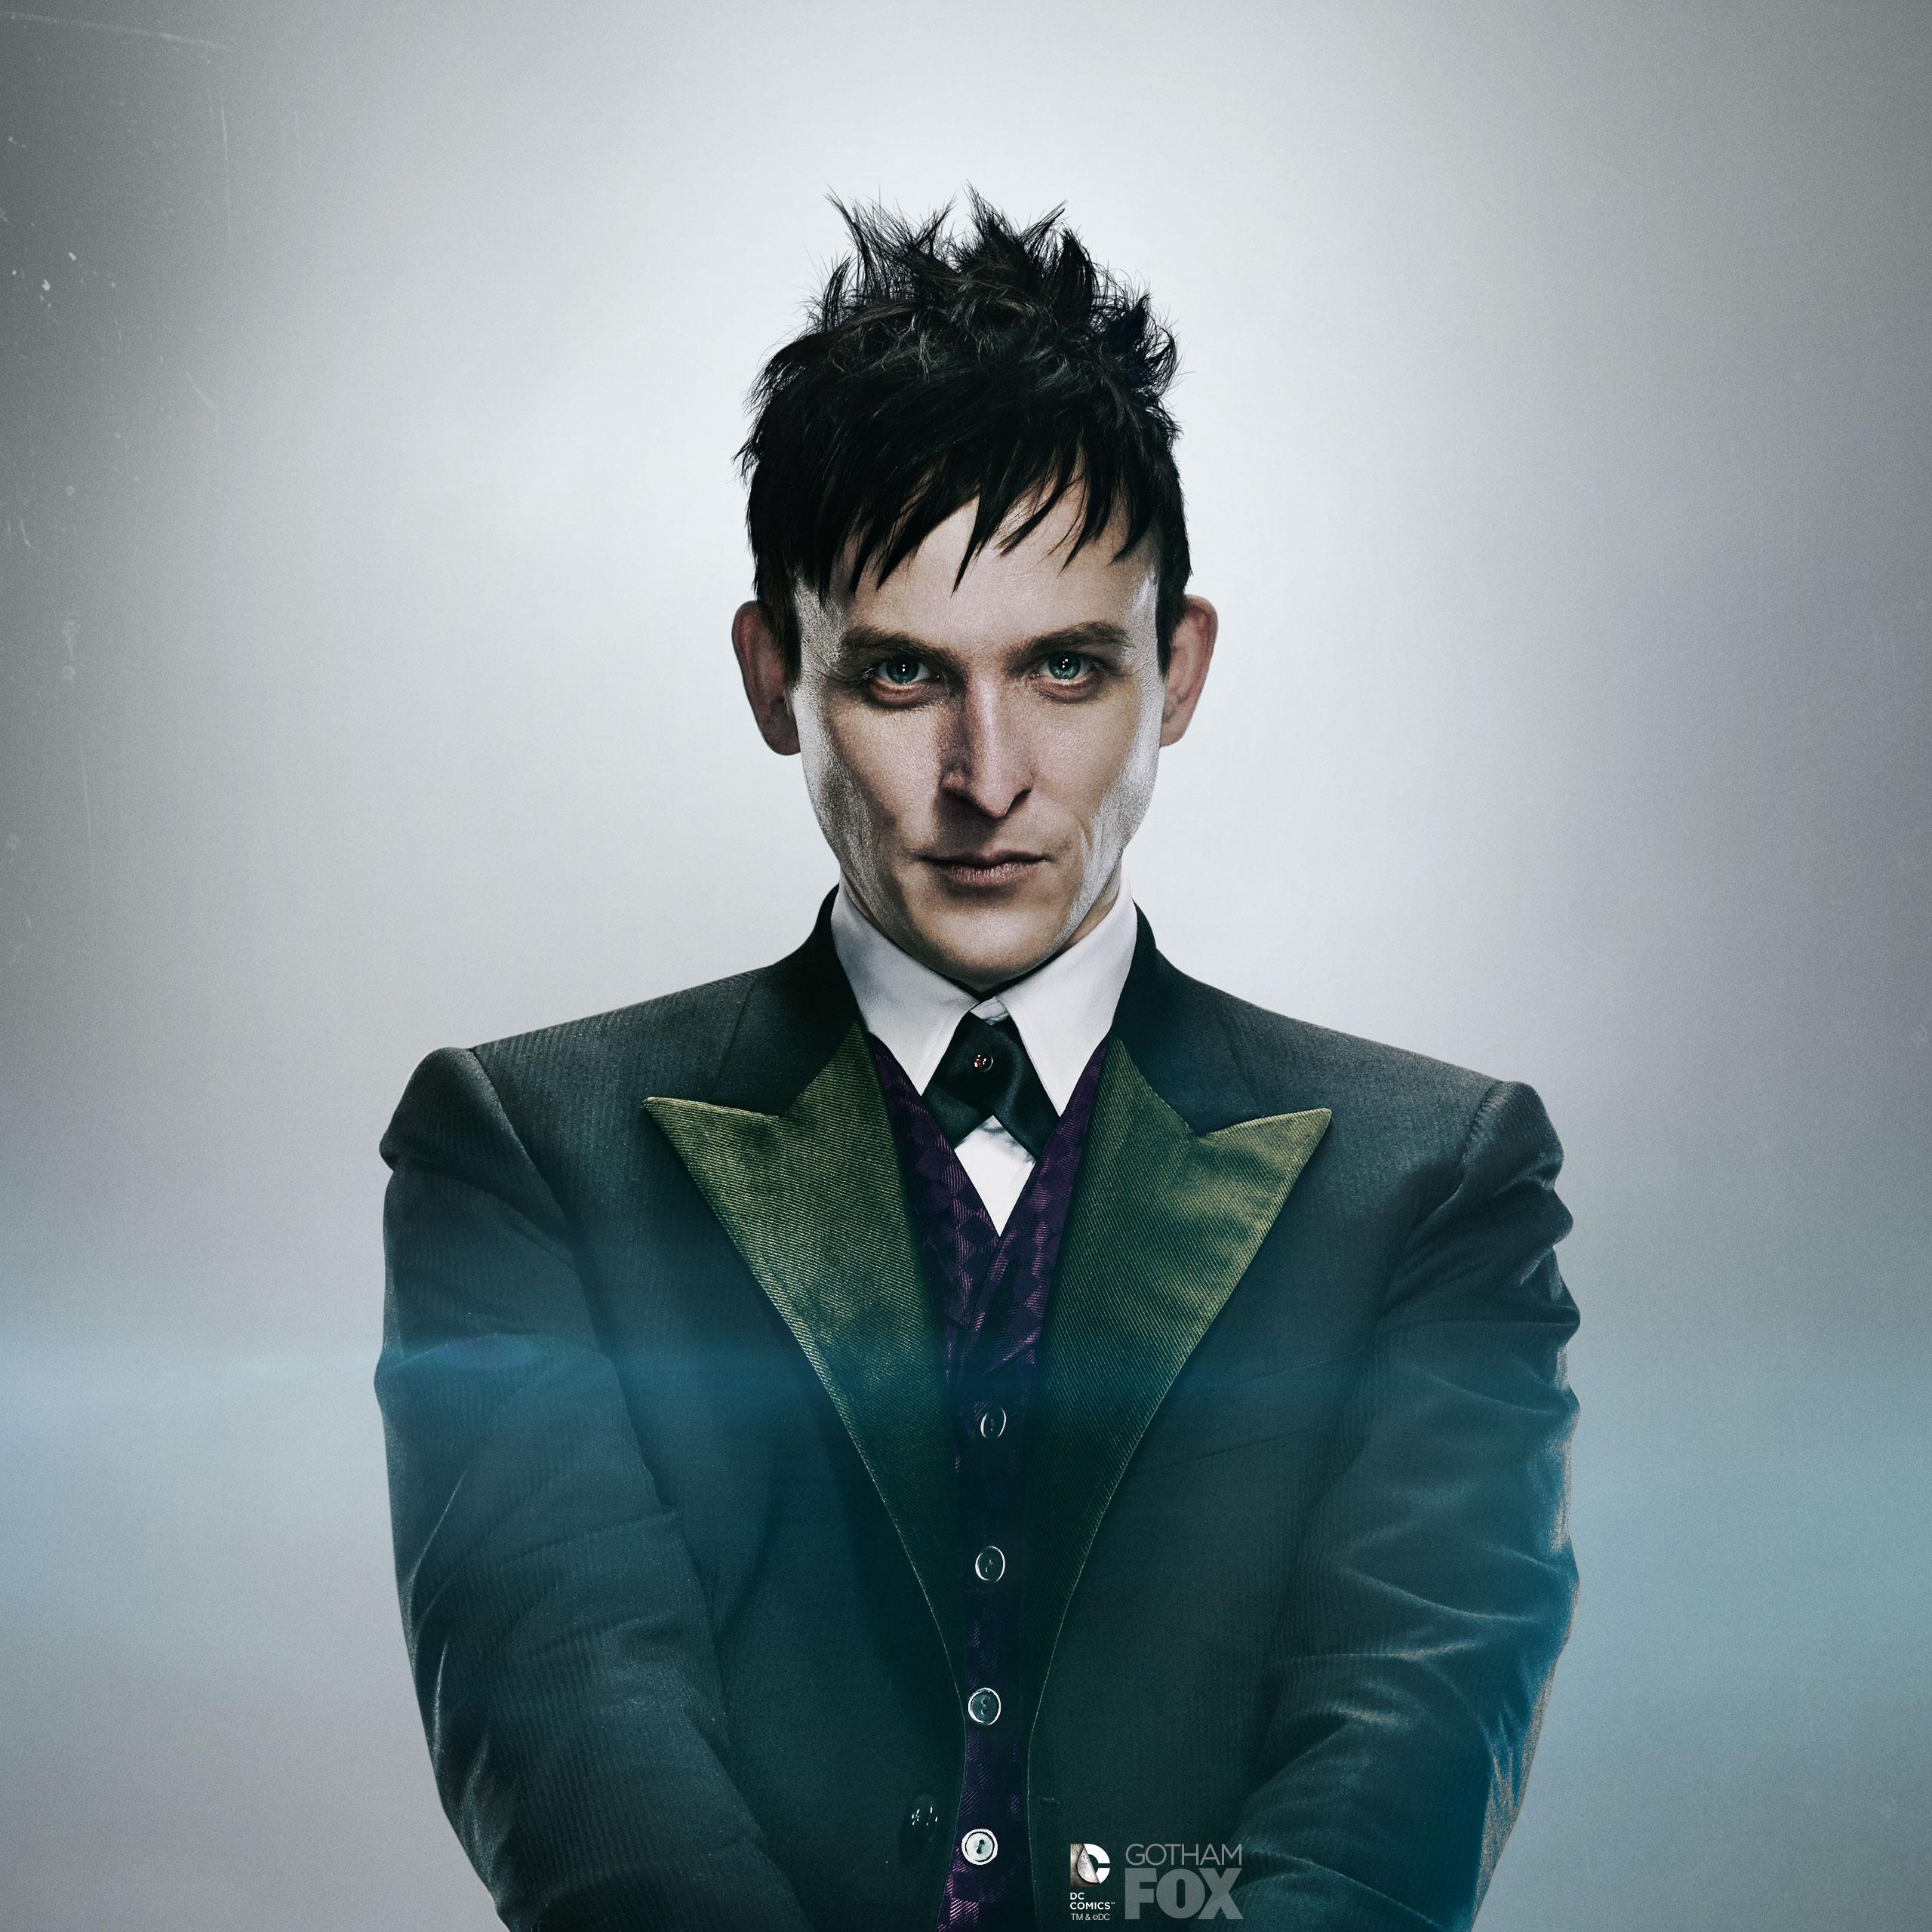 Gotham Wallpaper Oswald Cobblepot 2K wallpapers and backgrounds photos